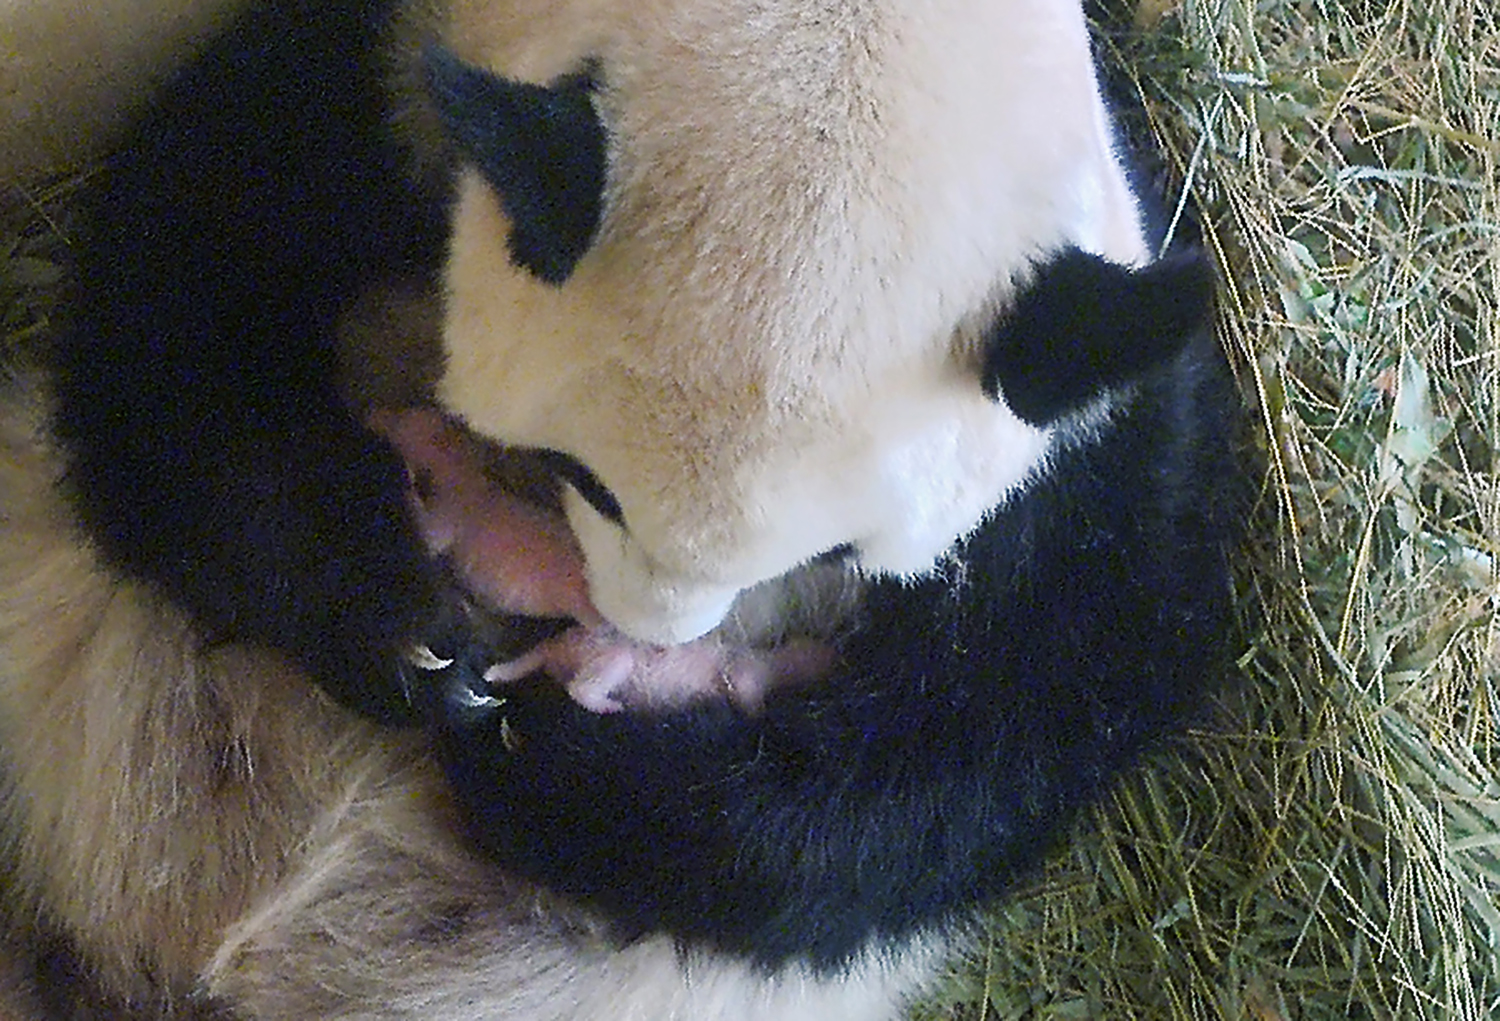 PHOTO: A frame from a video camera of panda mother Yang Yang holding her twins at the Tiergarten Schoenbrunn zoo in Vienna, Aug. 15,2016.The two baby pandas were born at the zoo on August 7, 2016.